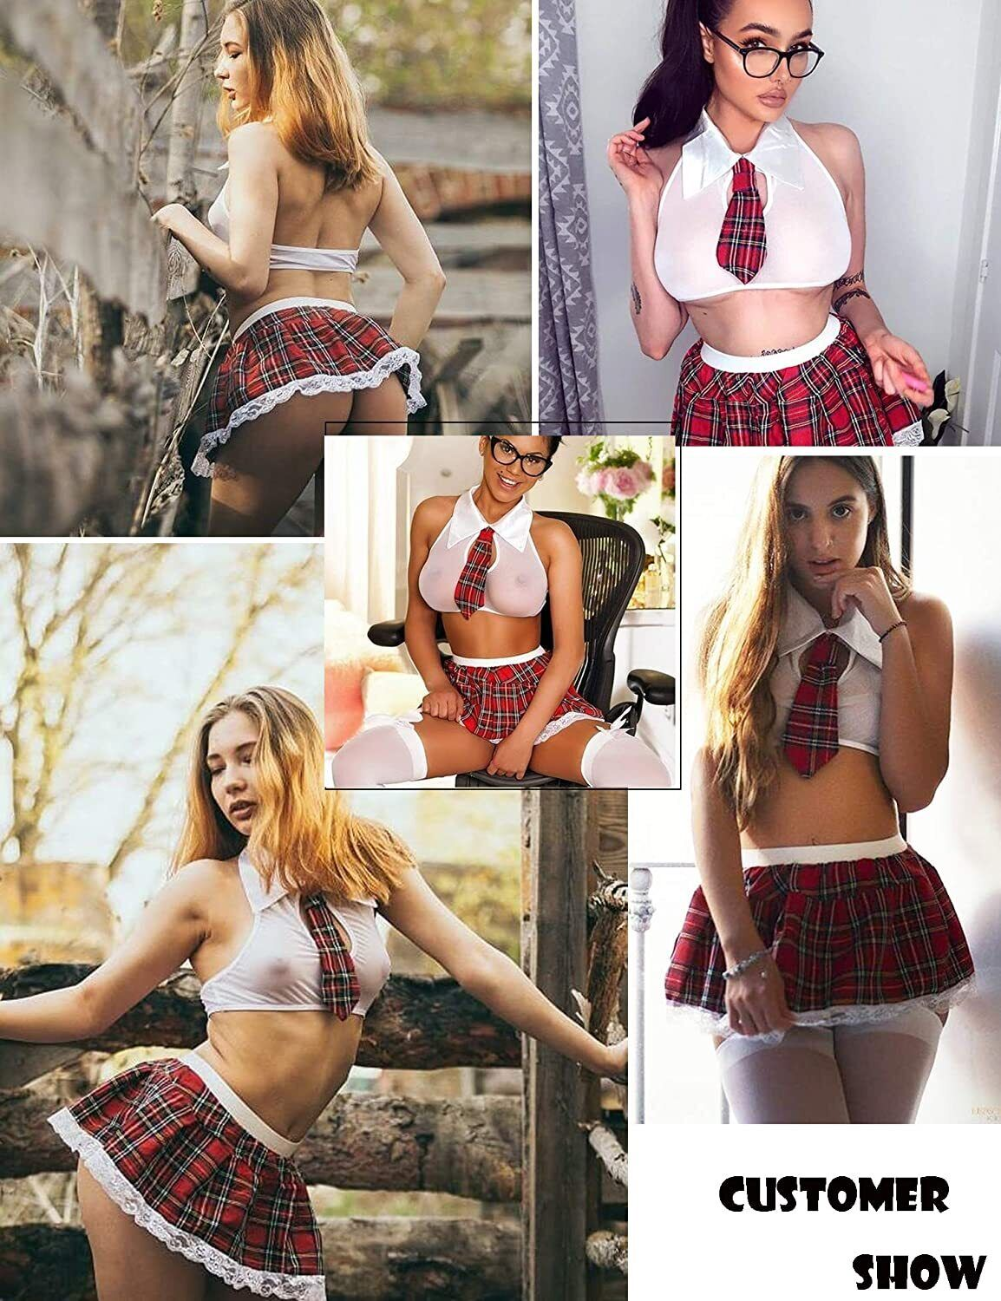 Women Sexy Lingerie School Girl Uniform Costume Outfit Mini Skirt Roleplay Sets Unbranded Does Not Apply - фотография #3